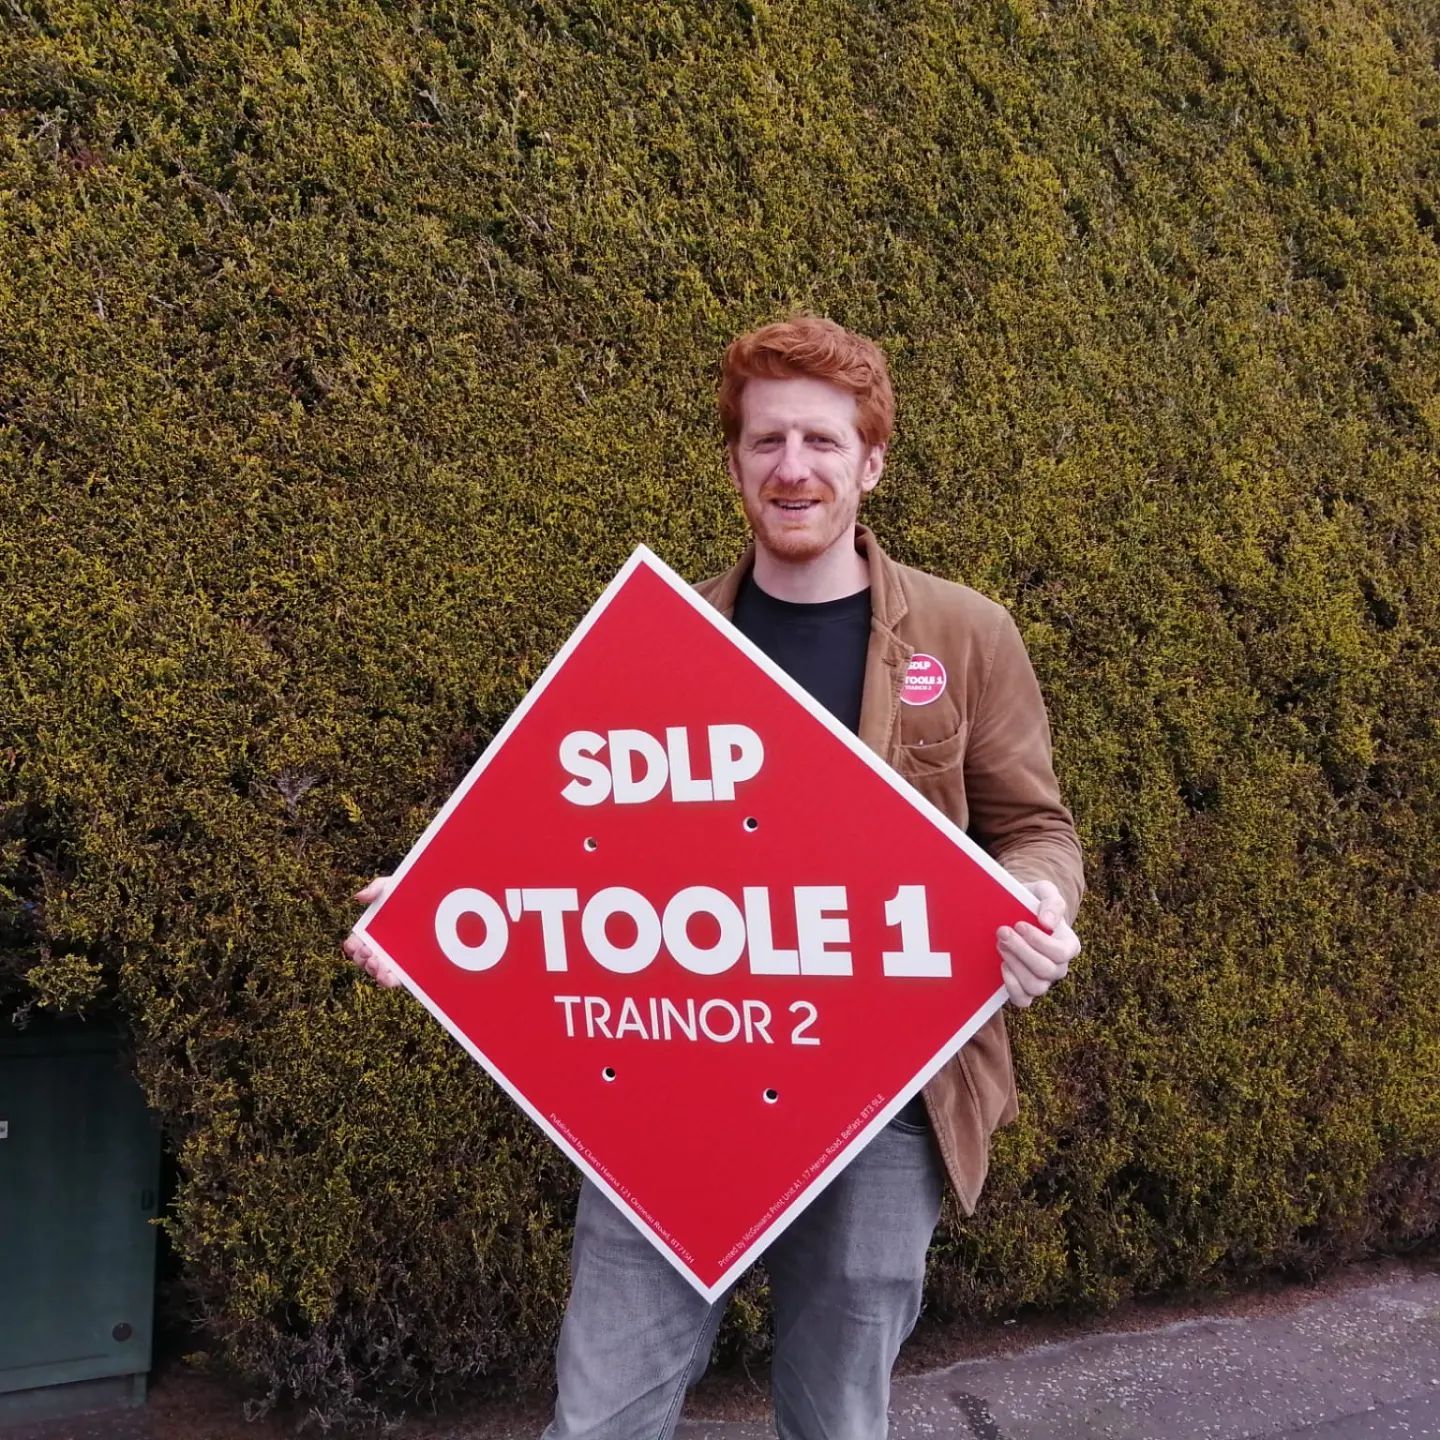 THERE\'S MORE: SDLP\'s Matthew O\'Toole